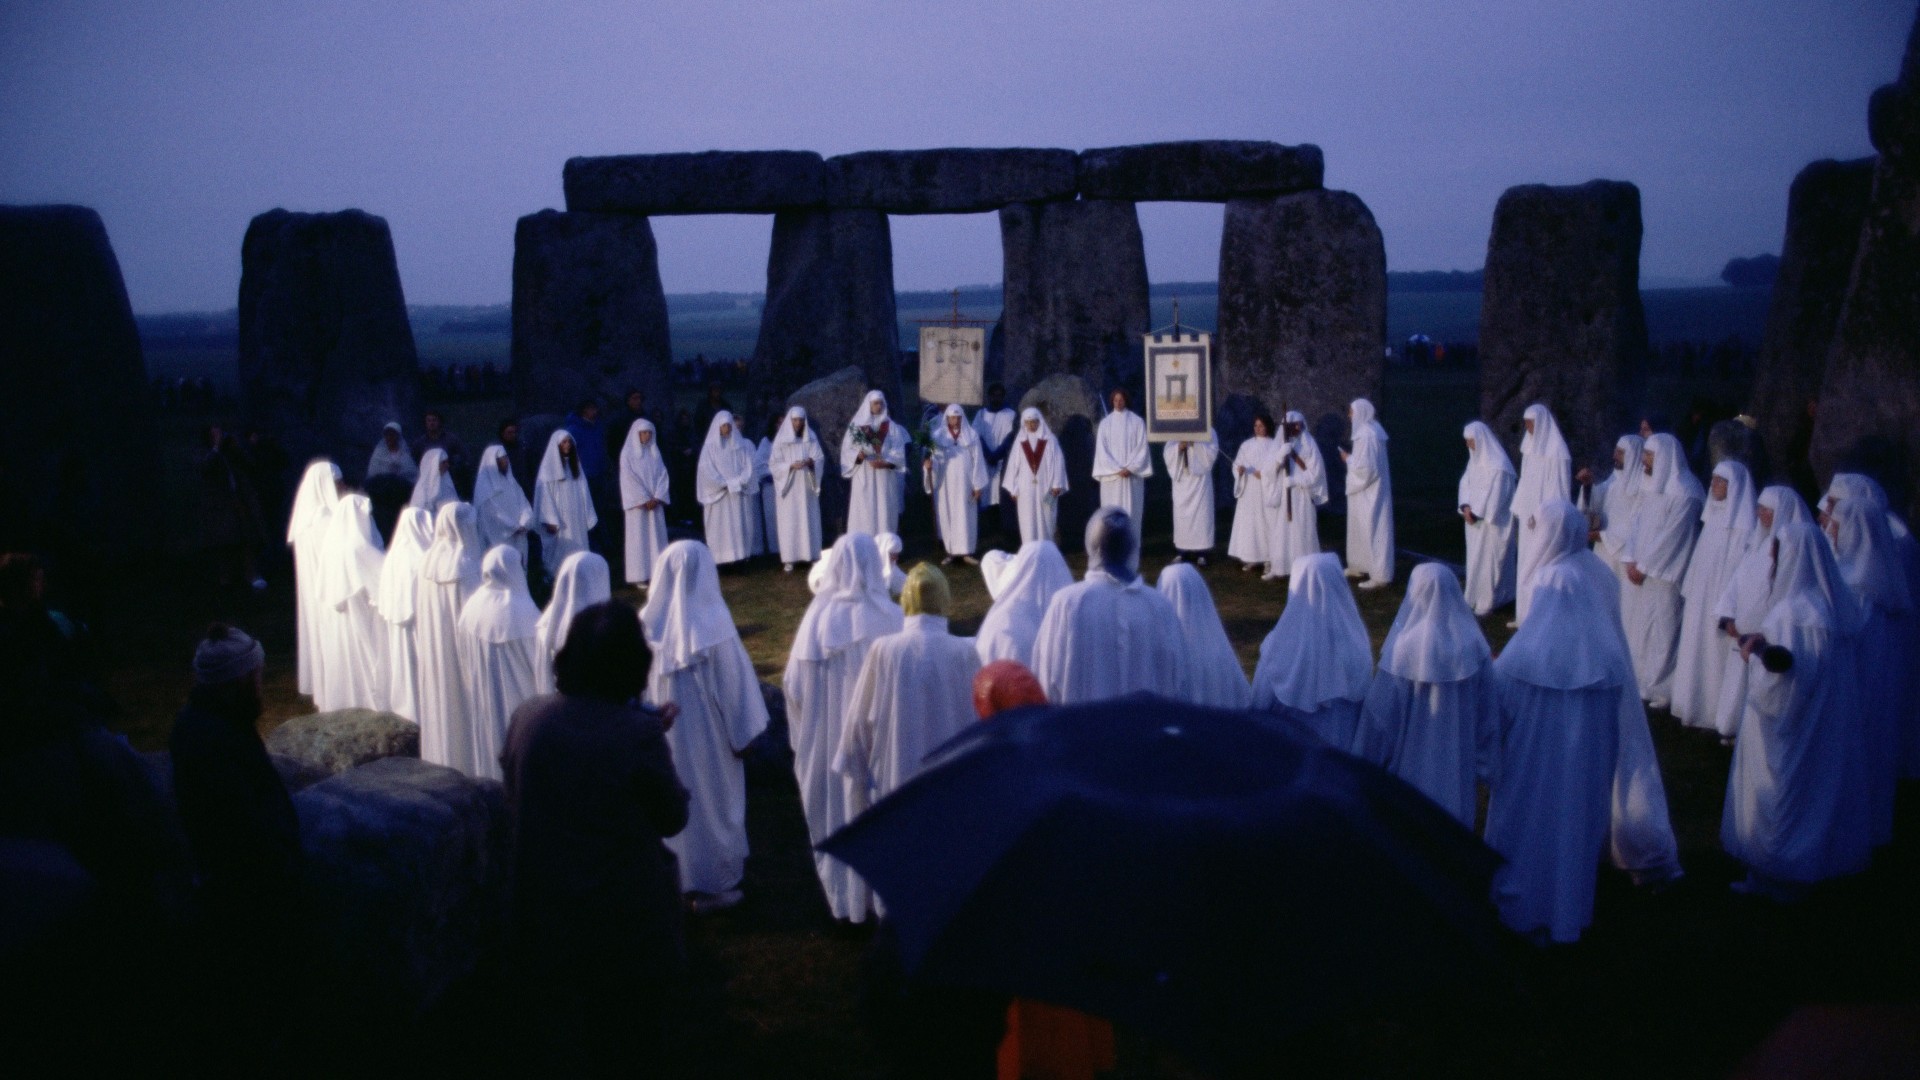 A large crowd of Druids dressed in white robes at a night-time gathering at Stonehenge in Wiltshire, England